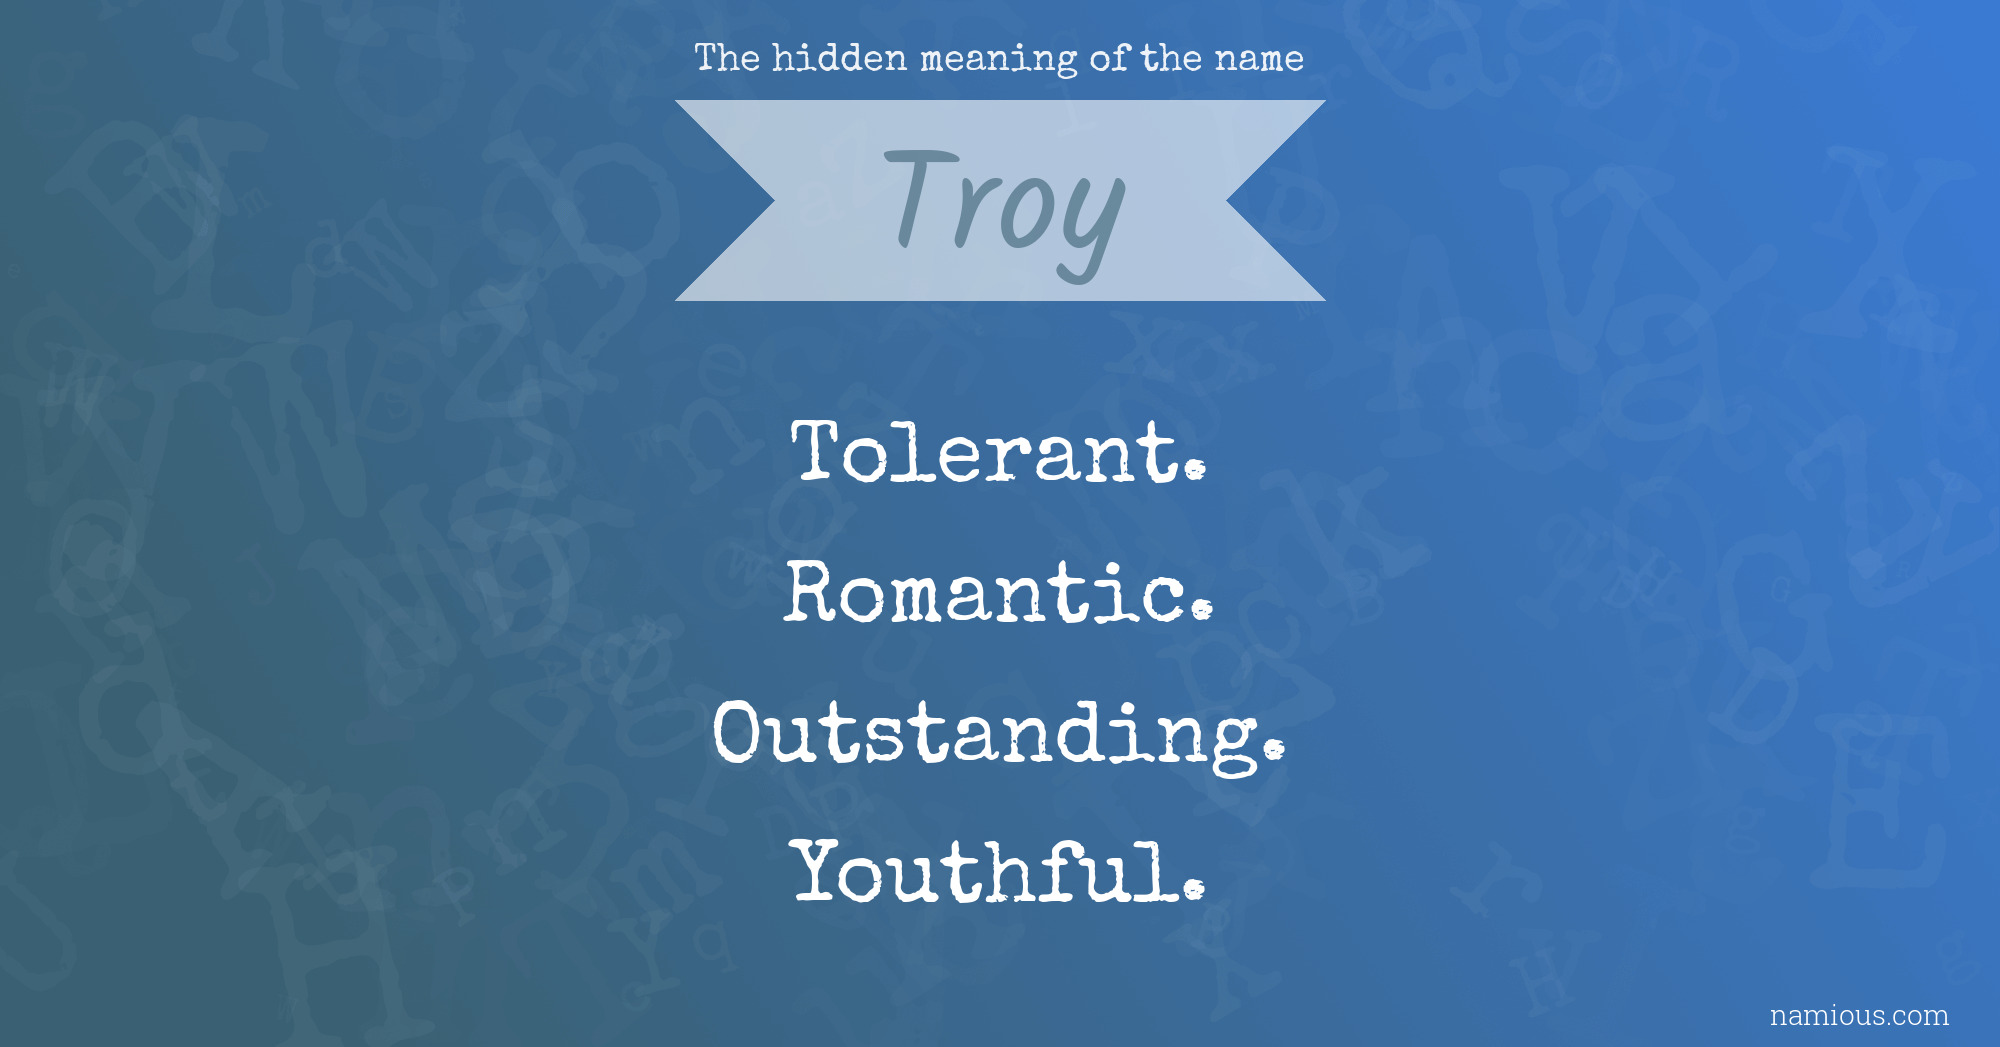 The hidden meaning of the name Troy